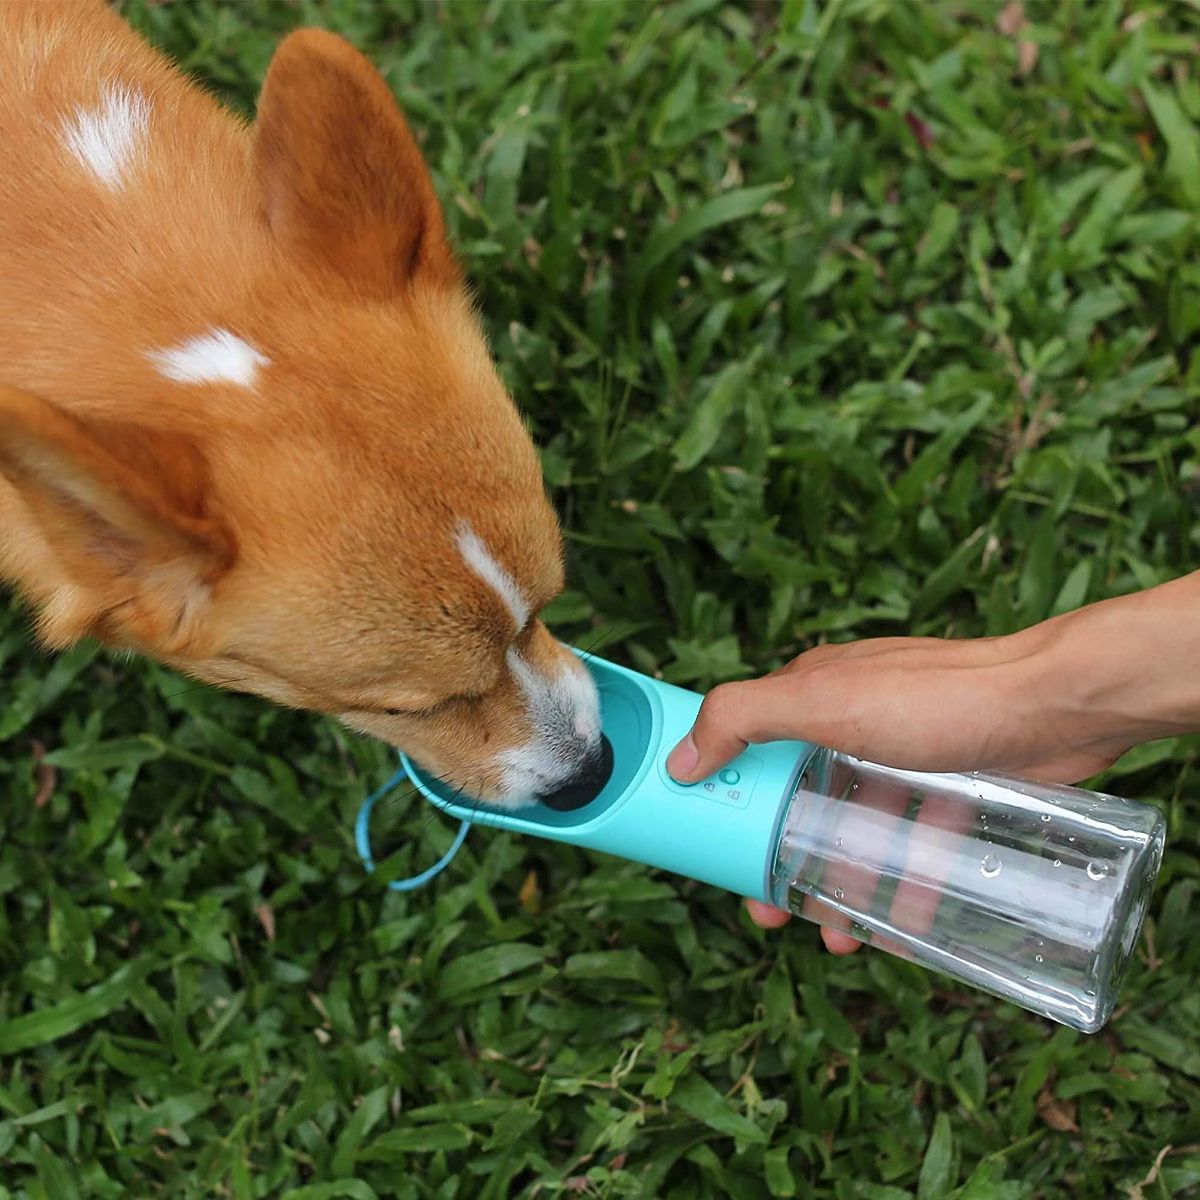 water bottle dispenser with blue dispenser that a dog is drinking out of